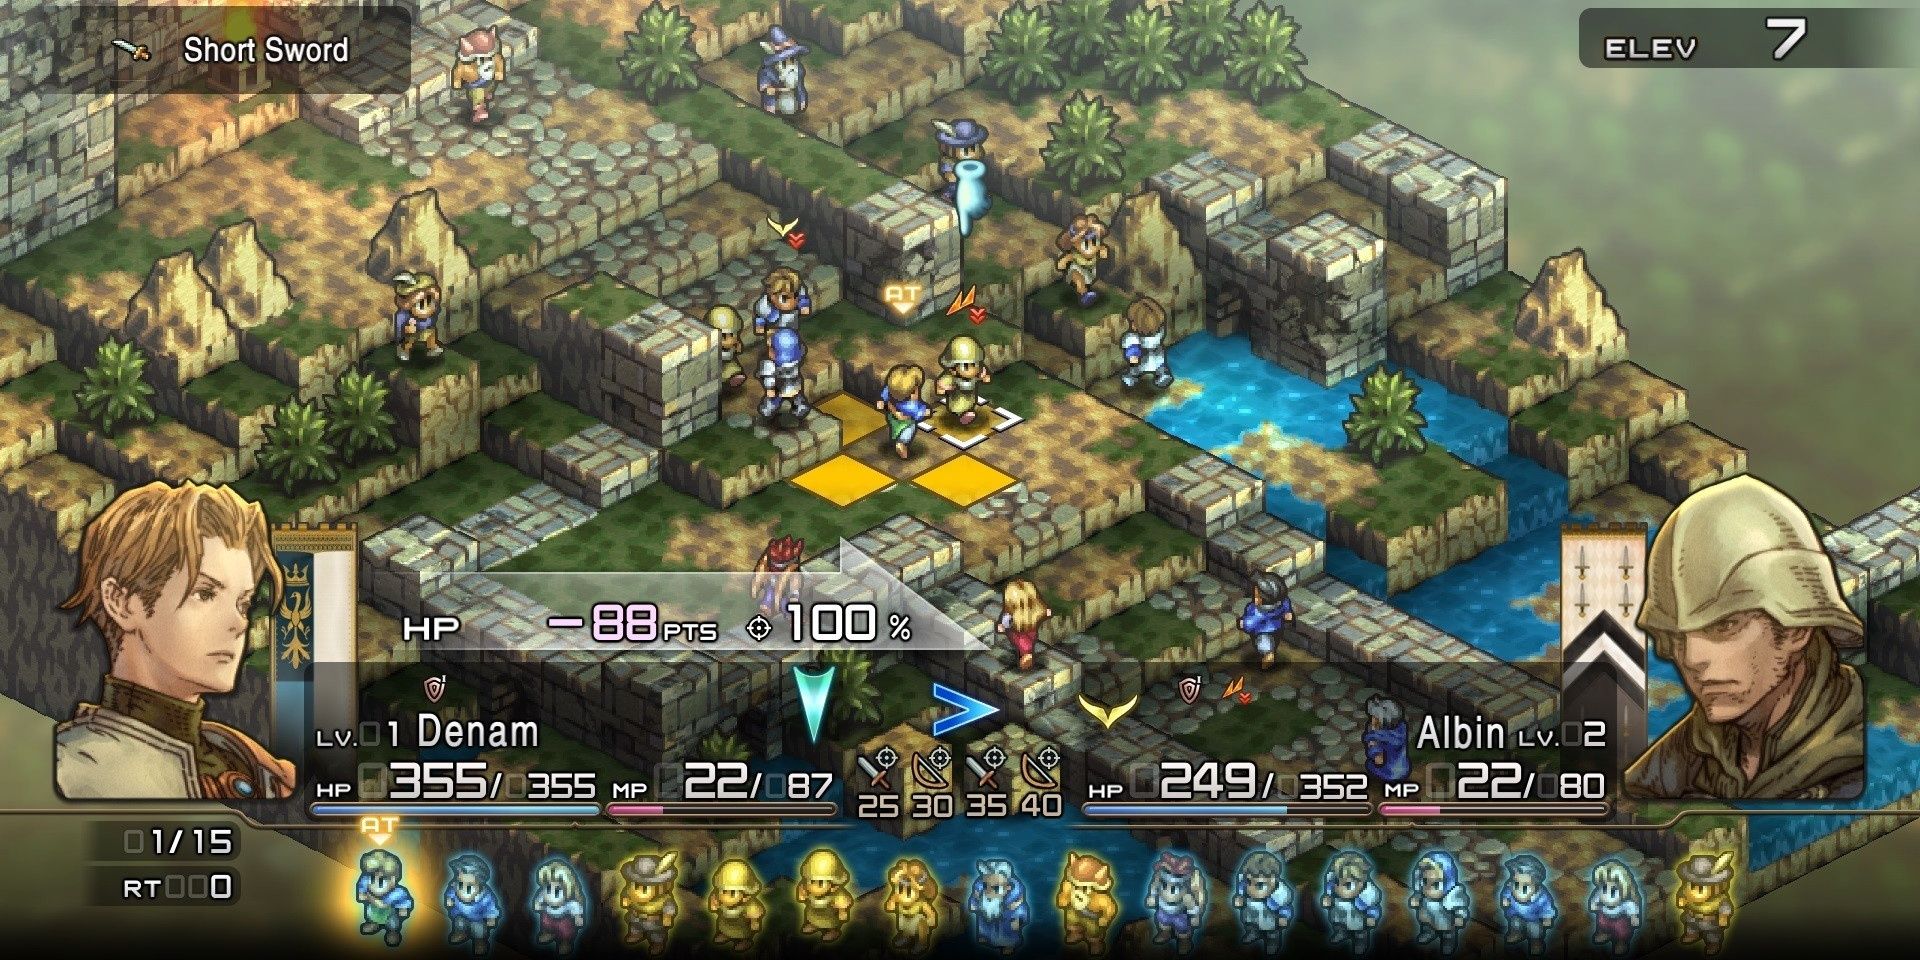 A typical battle in Tactics Ogre Reborn where the main character prepares an attack.